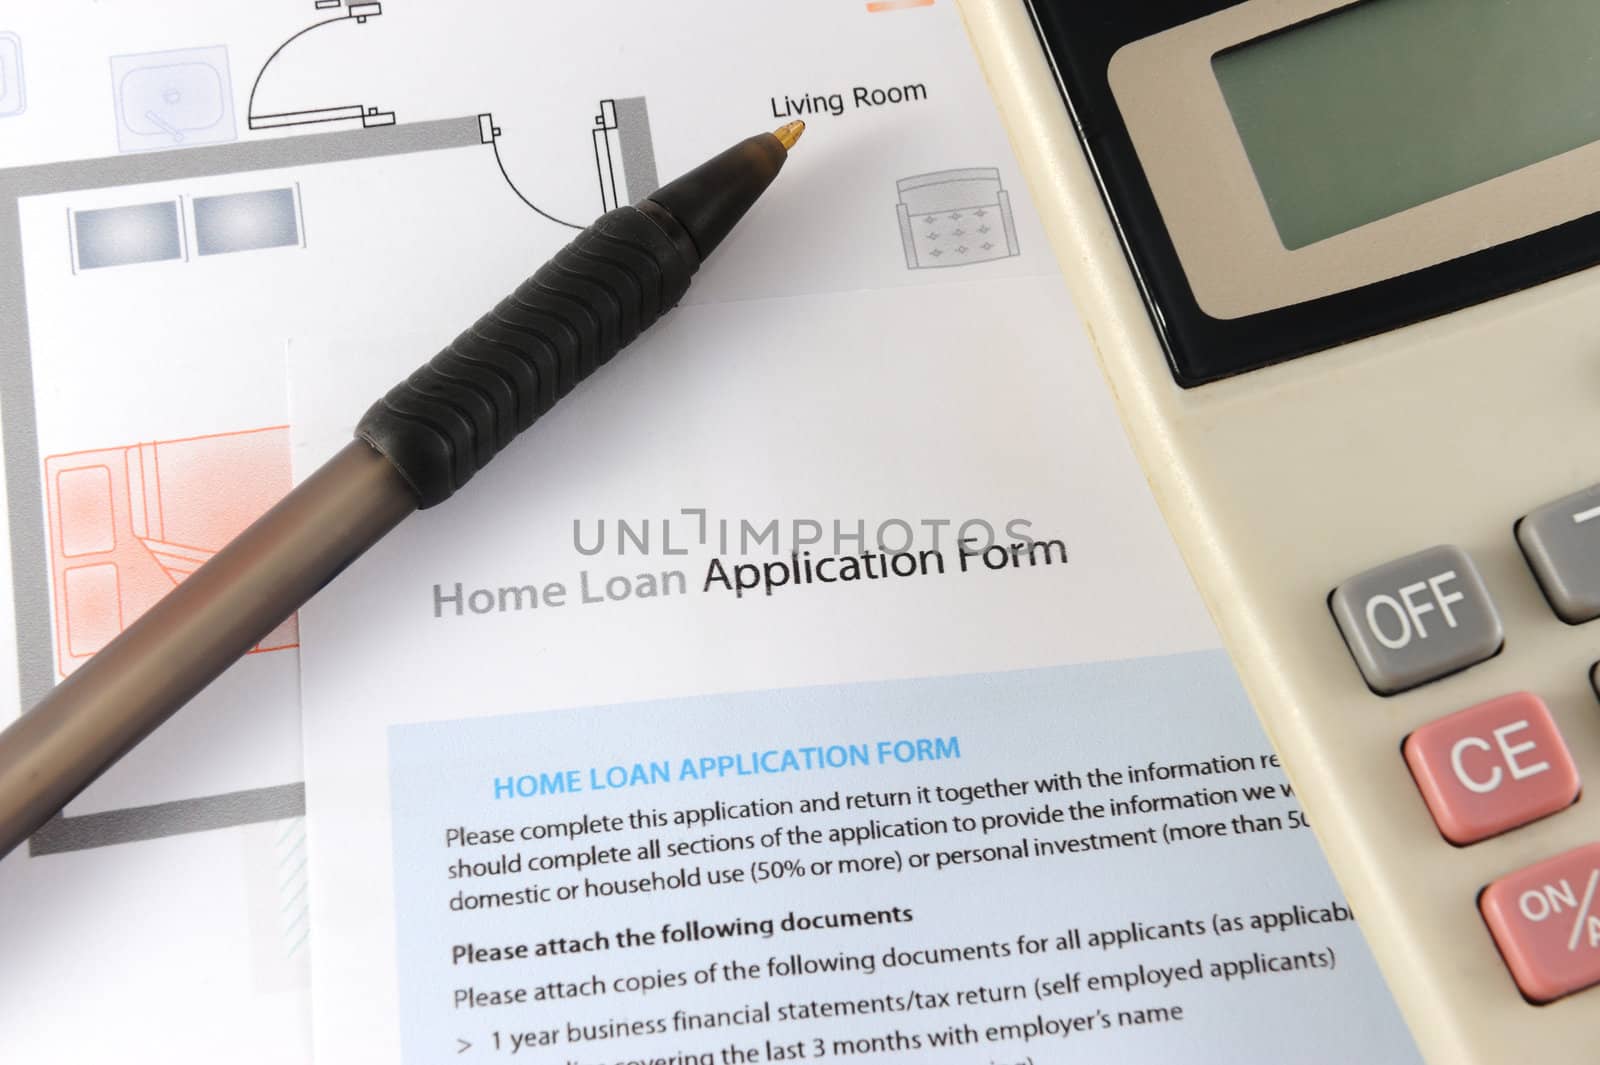 Home loan application form with calculator and pen nearby